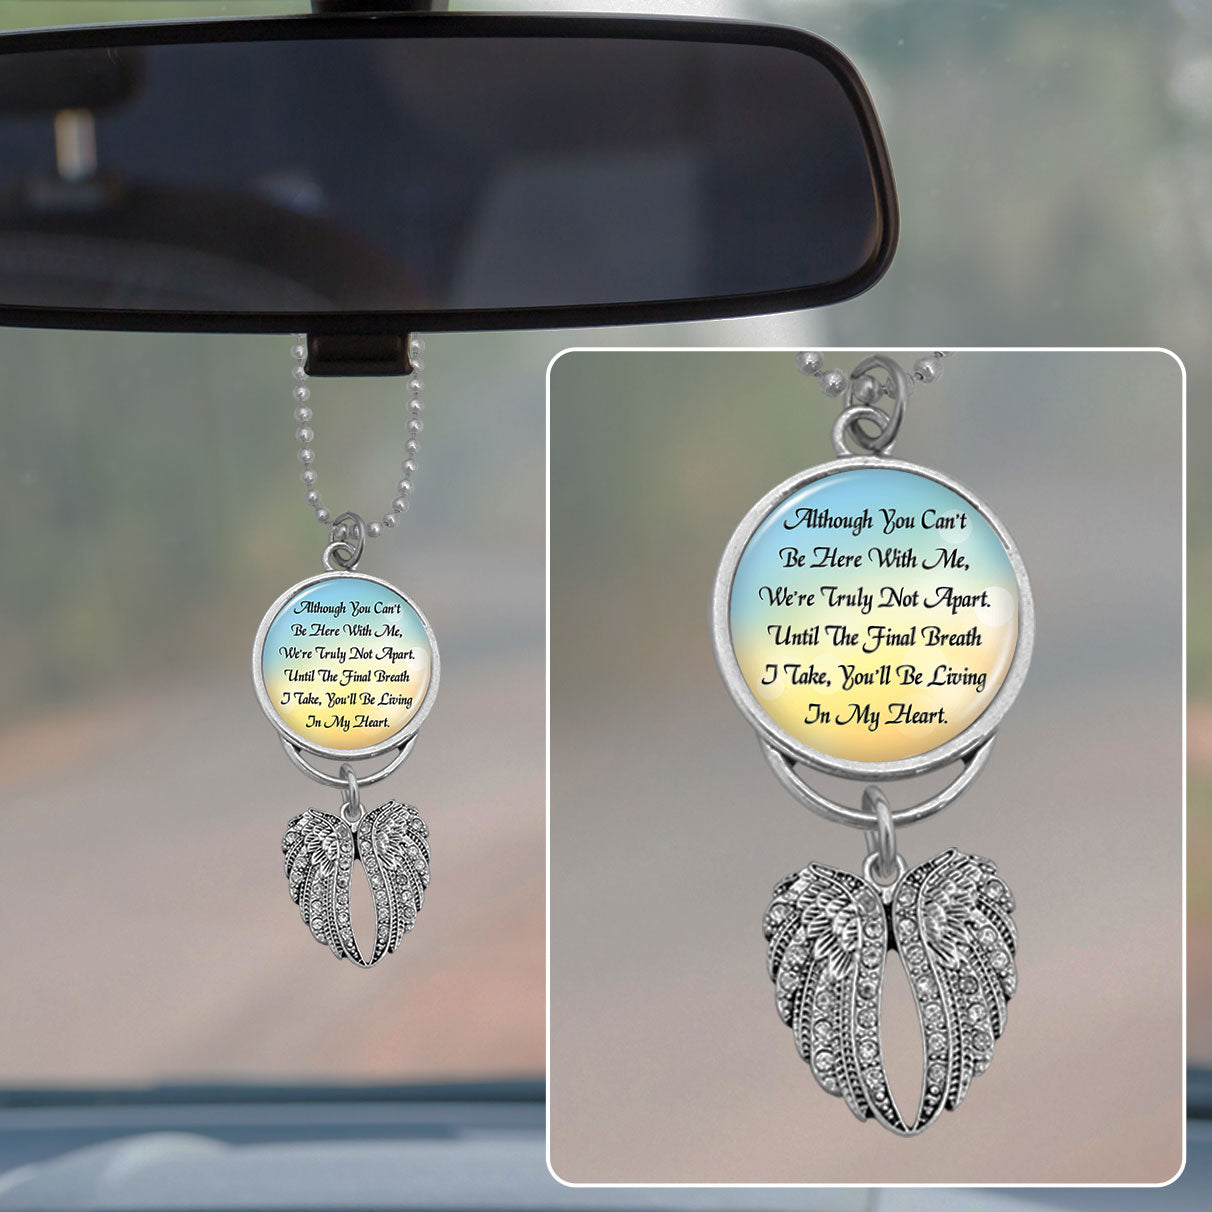 You'll Be Living In My Heart Rearview Mirror Charm